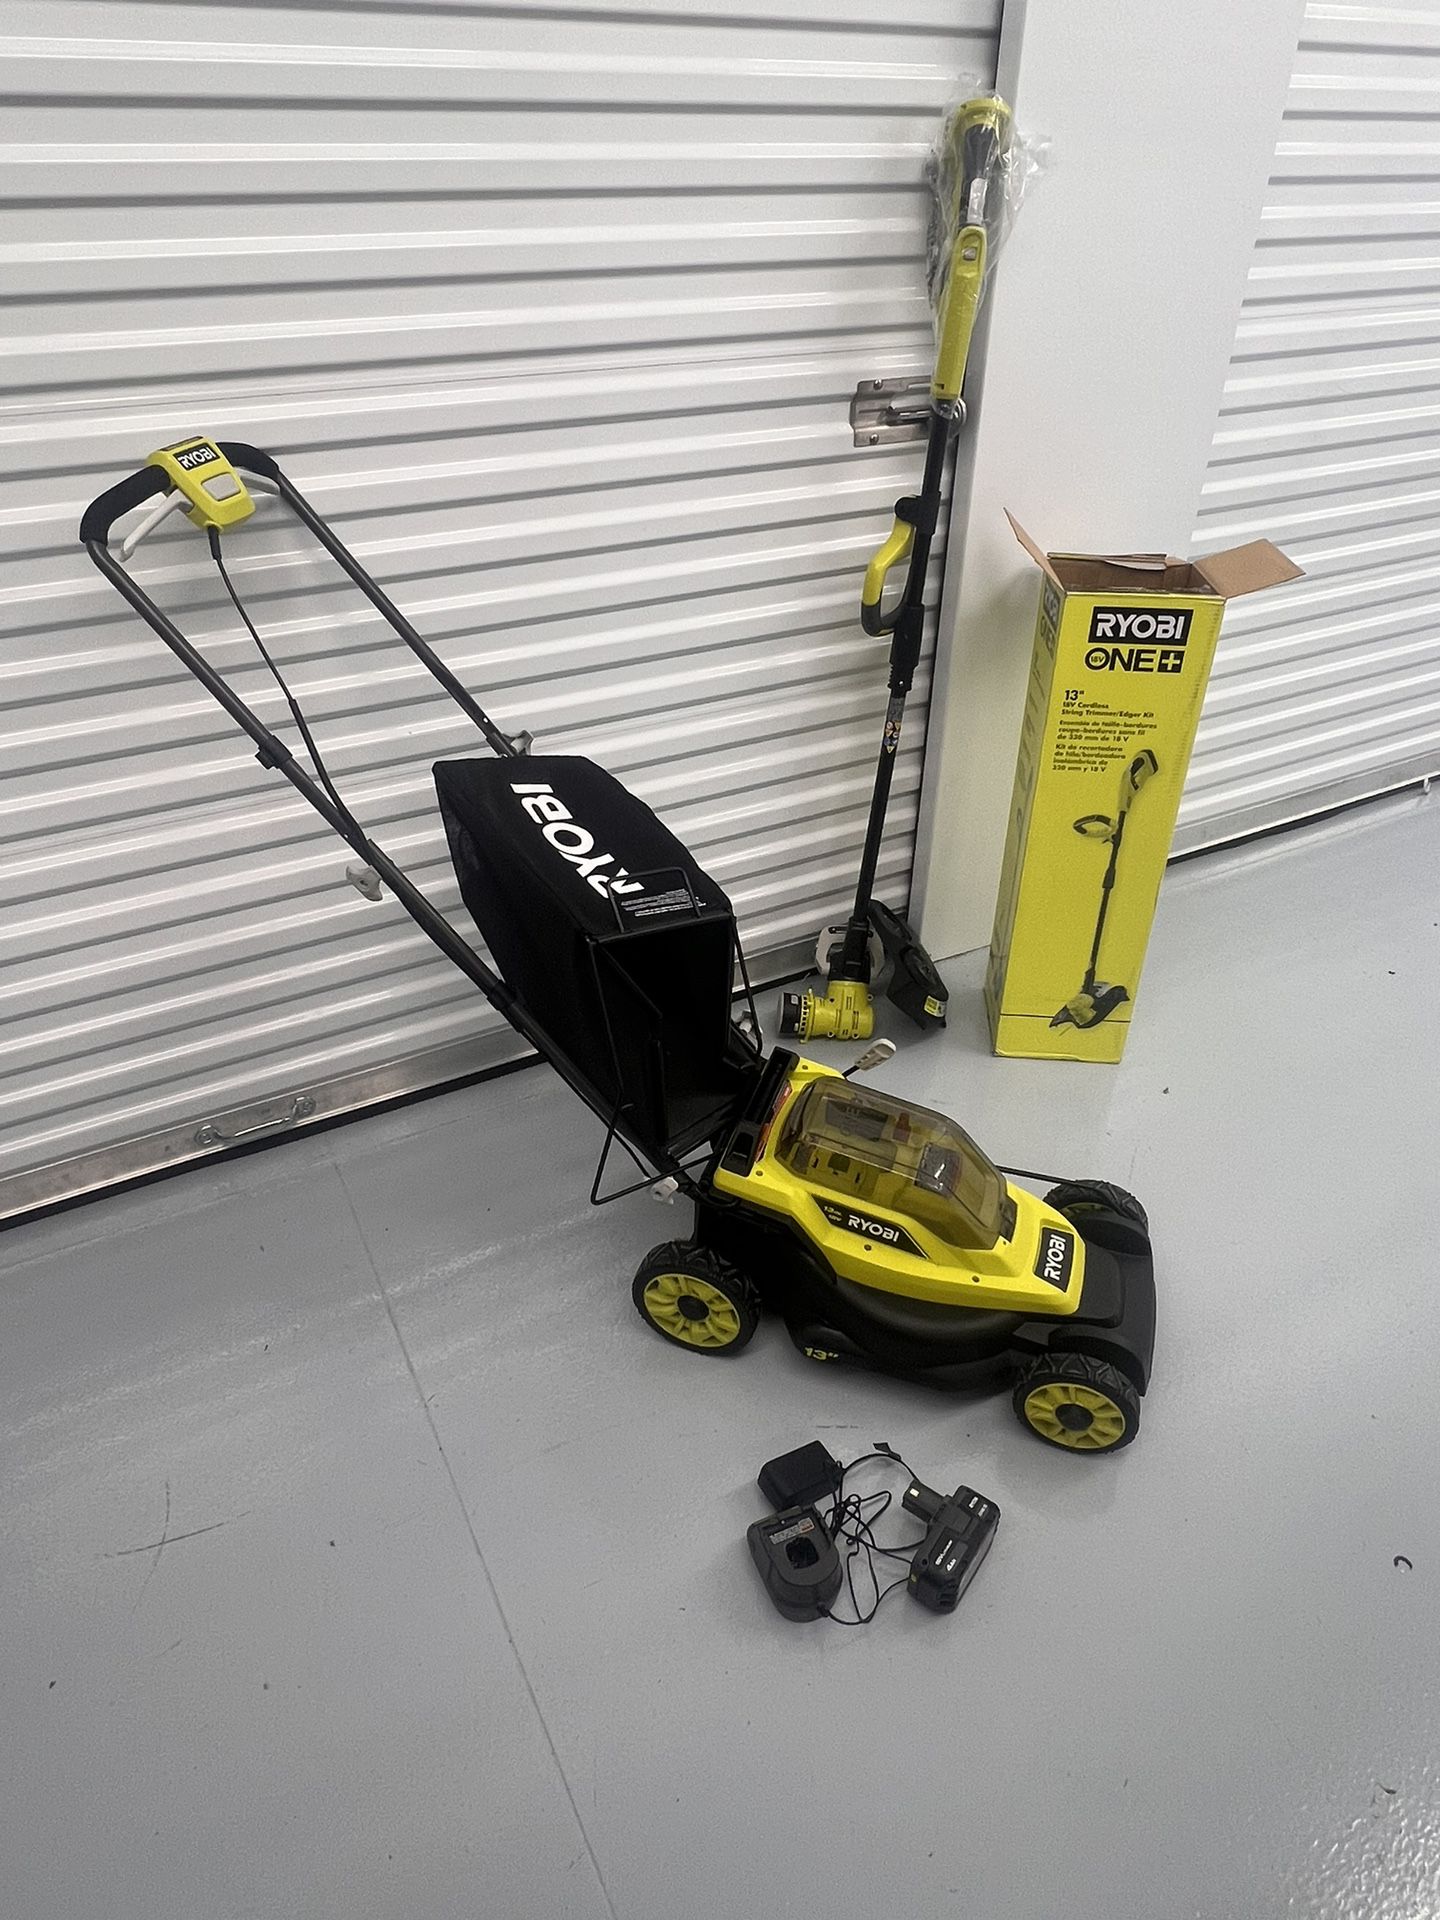 RYOBI ONE+ 18V 13 in. Cordless Battery Walk Behind Push Lawn Mower and 13 inch sting trimmer combo